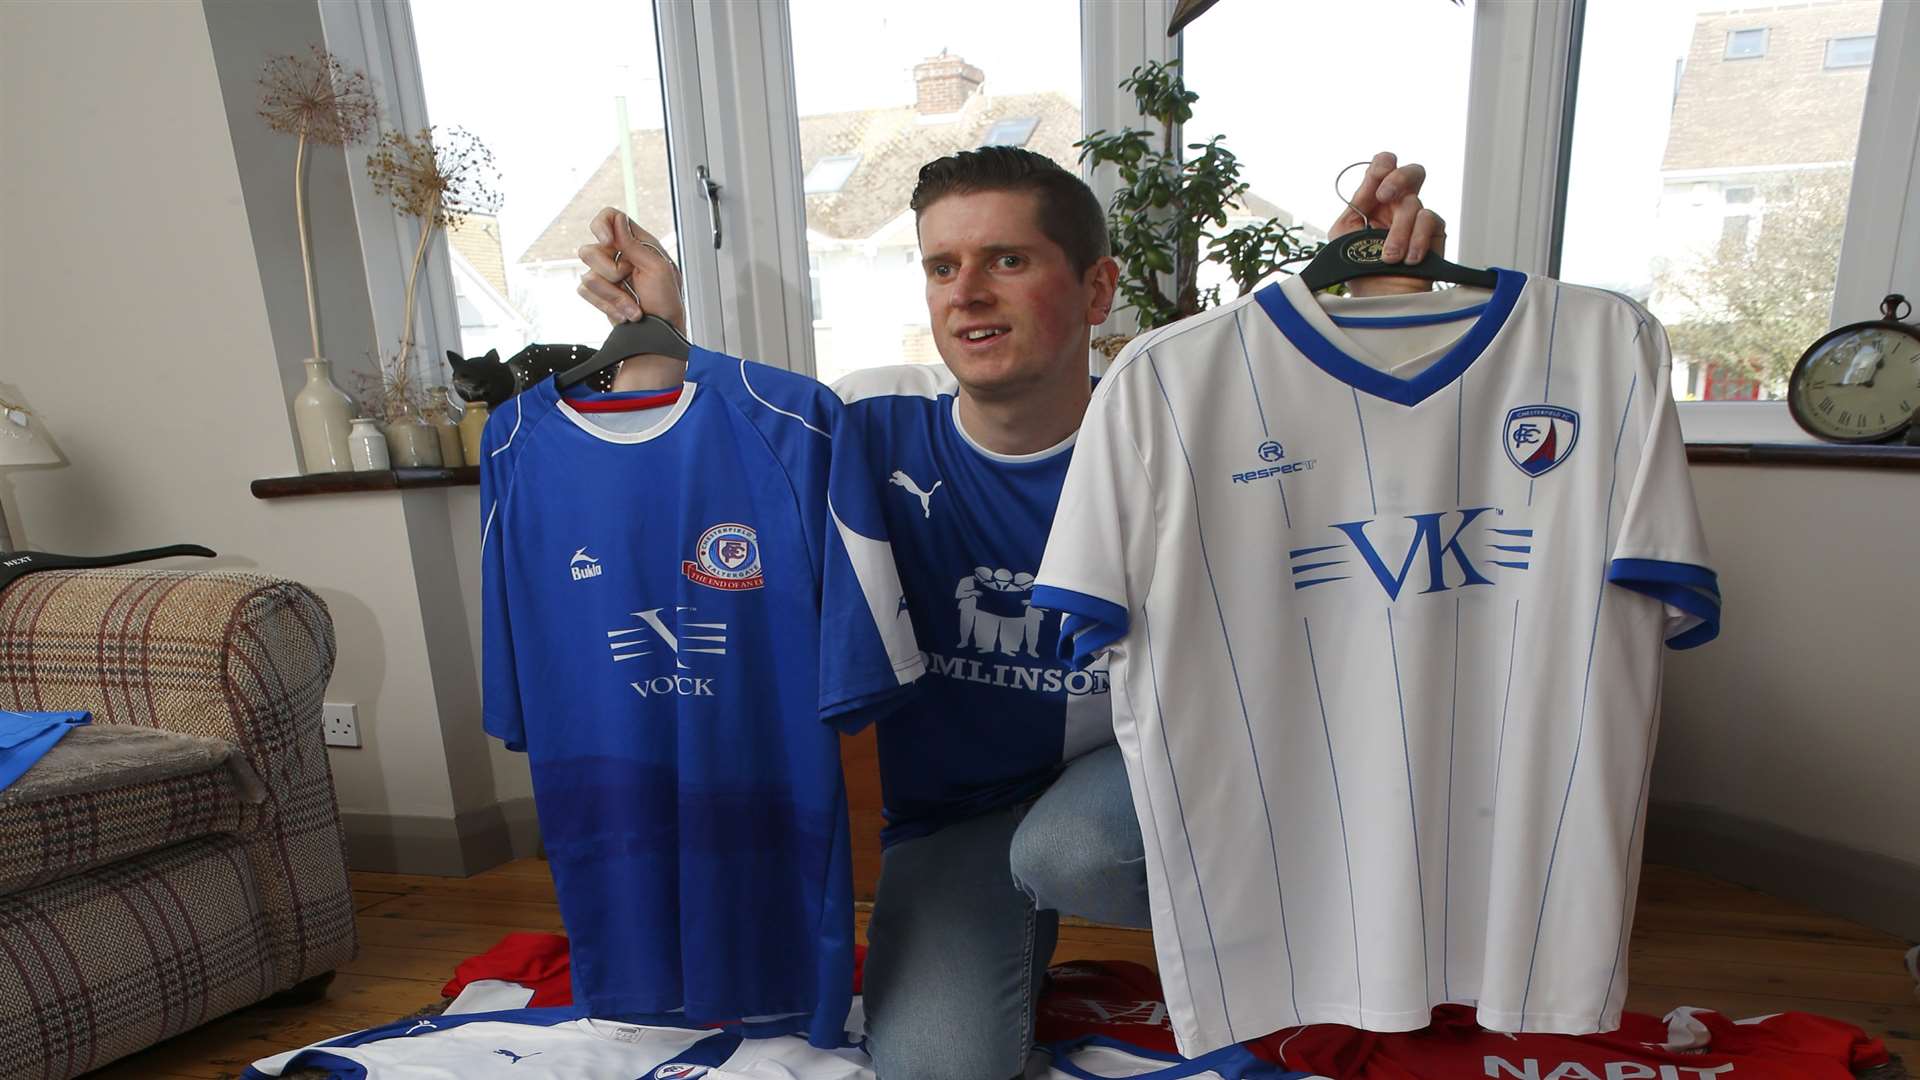 Kieran travels to every home and away game and collects replica shirts